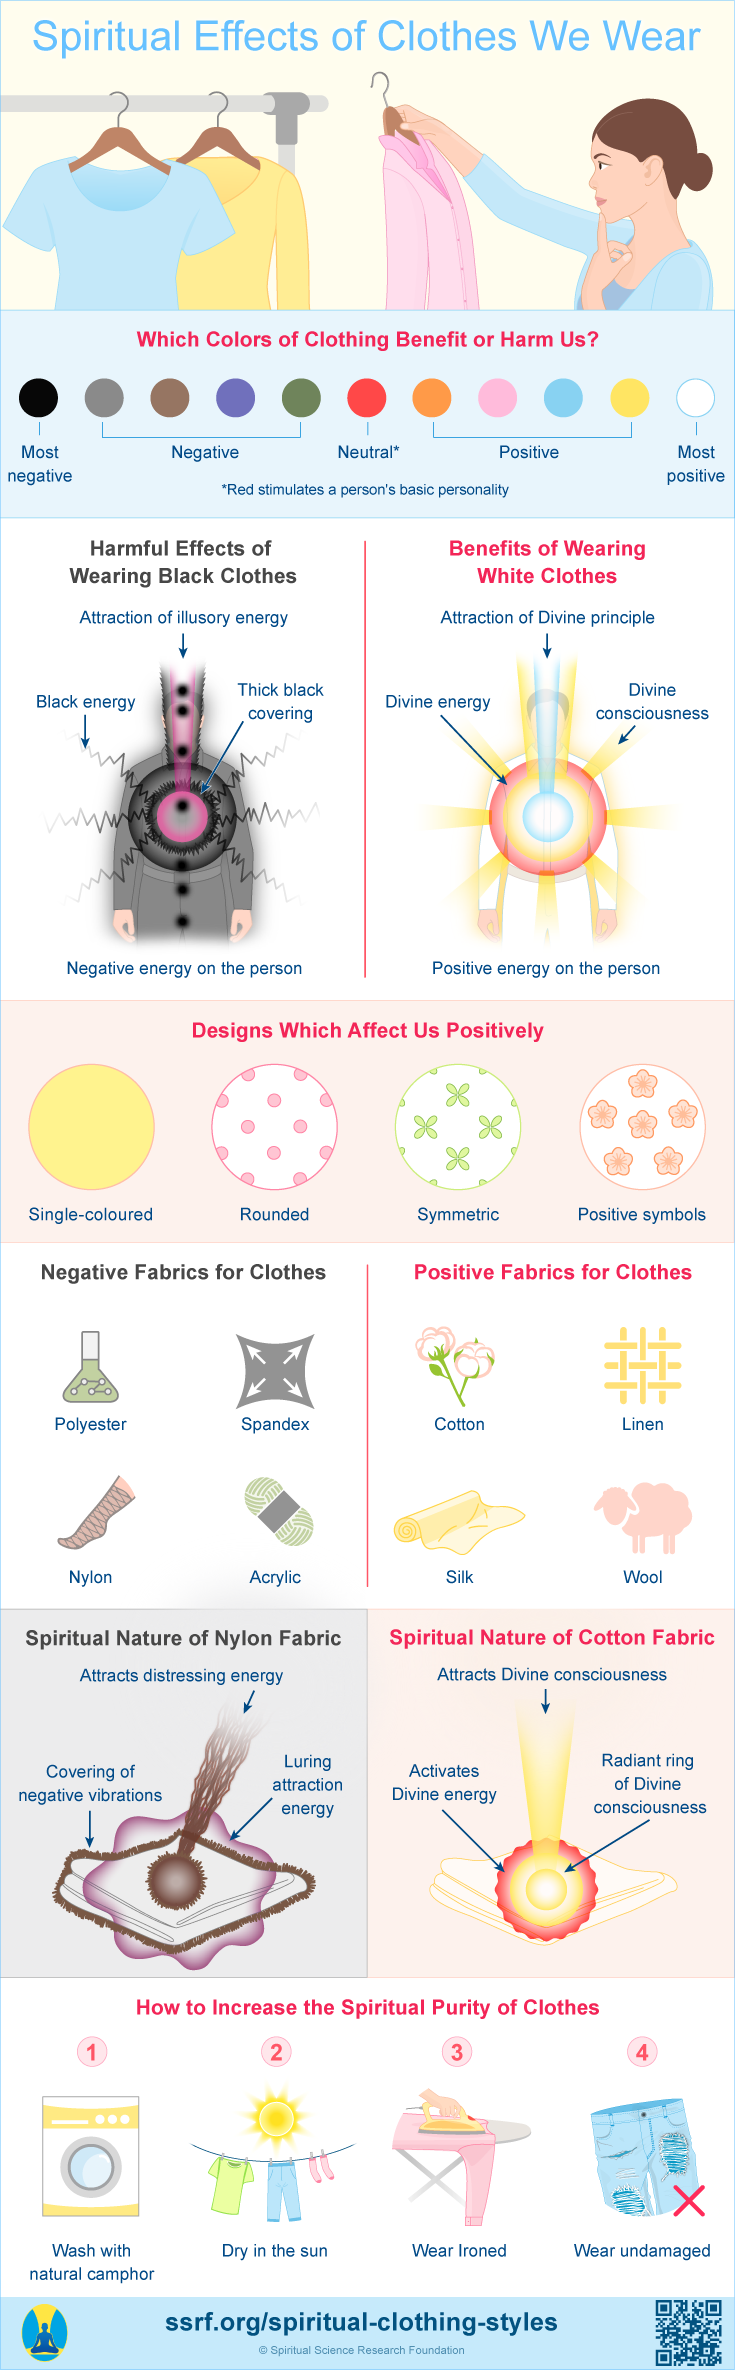 Spiritual Effects of Natural, Cotton and White Clothes